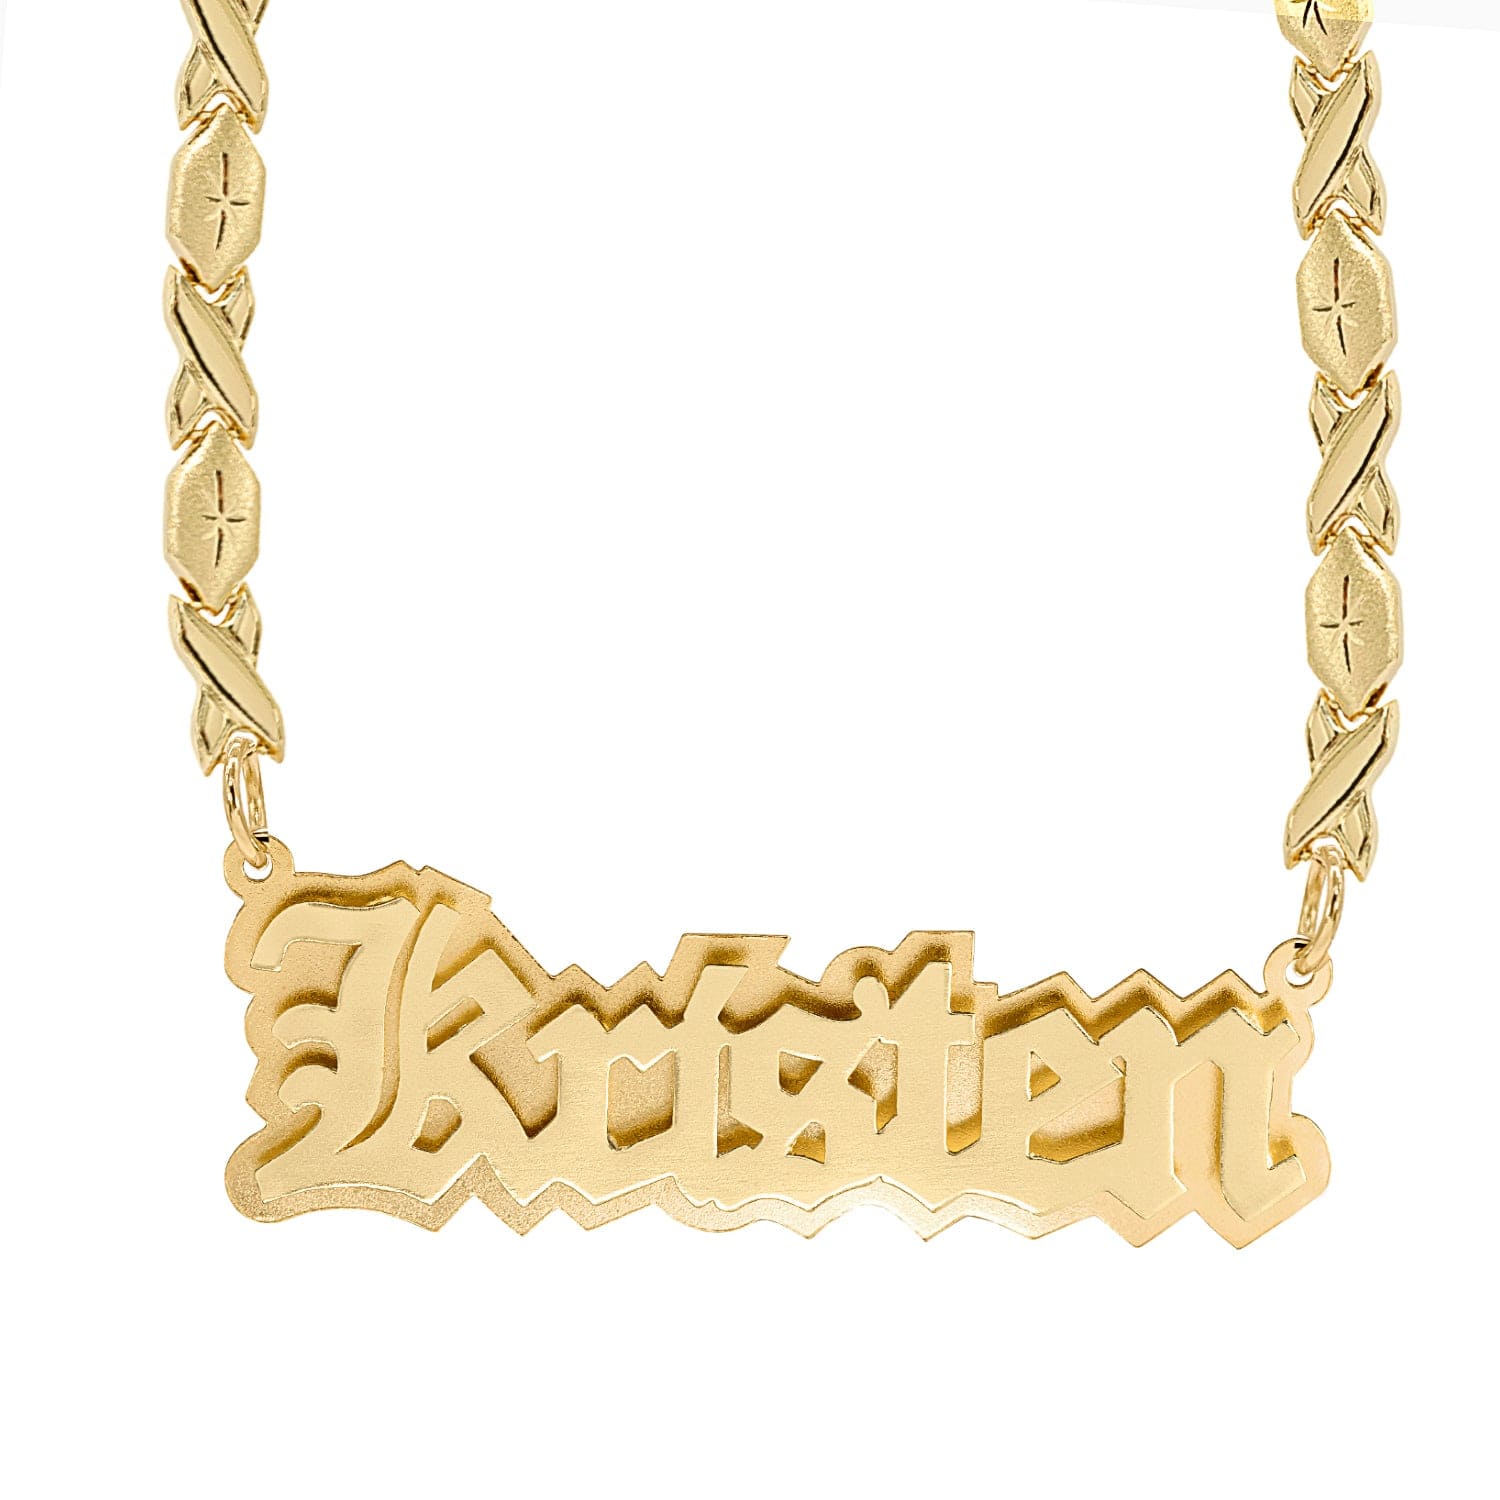 14k Gold over Sterling Silver / Xoxo Chain Double Plated Nameplate Necklace "Kristen" With Xoxo Chain